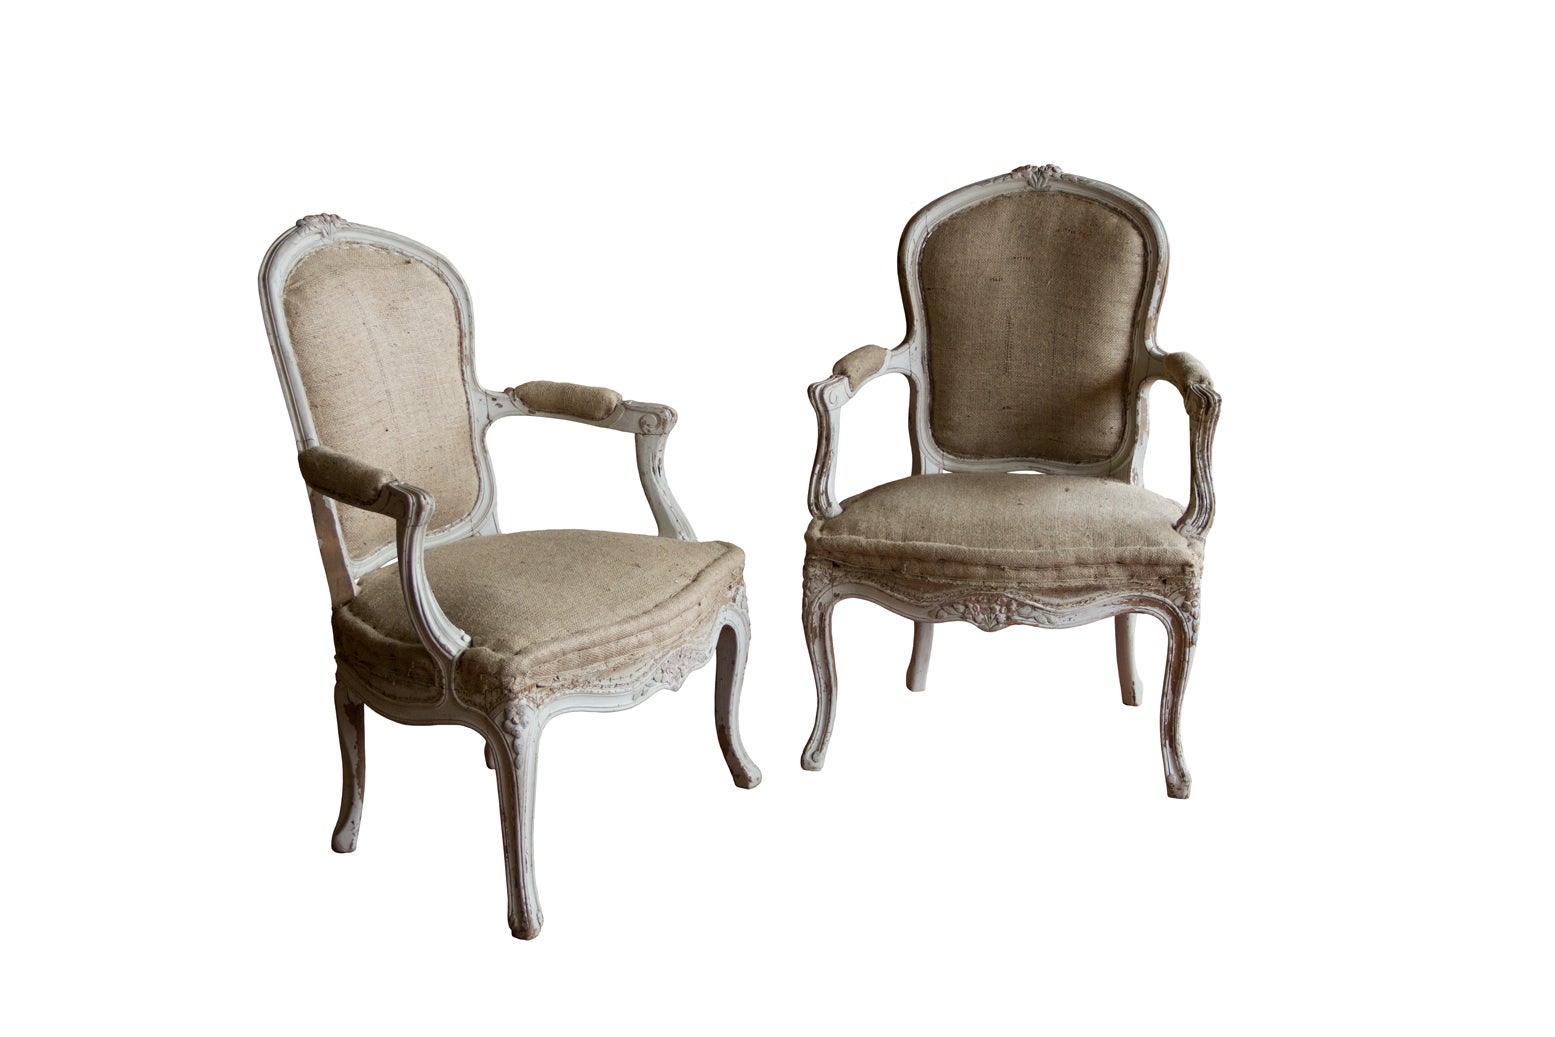 Pair of Vintage French Bergère Chairs